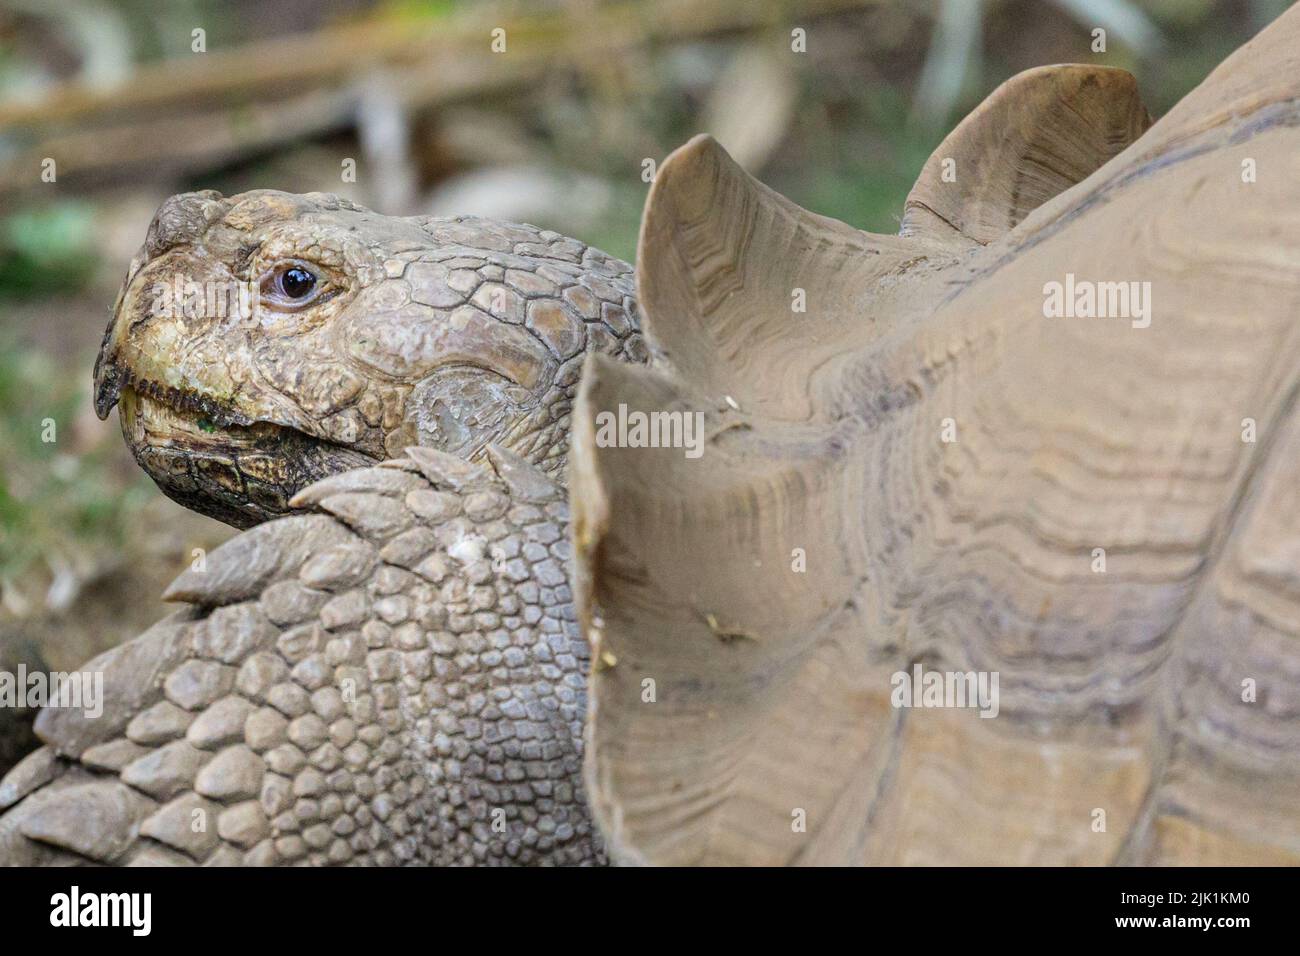 African spurred tortoise (Centrochelys sulcata), close up of head and upper torso Stock Photo